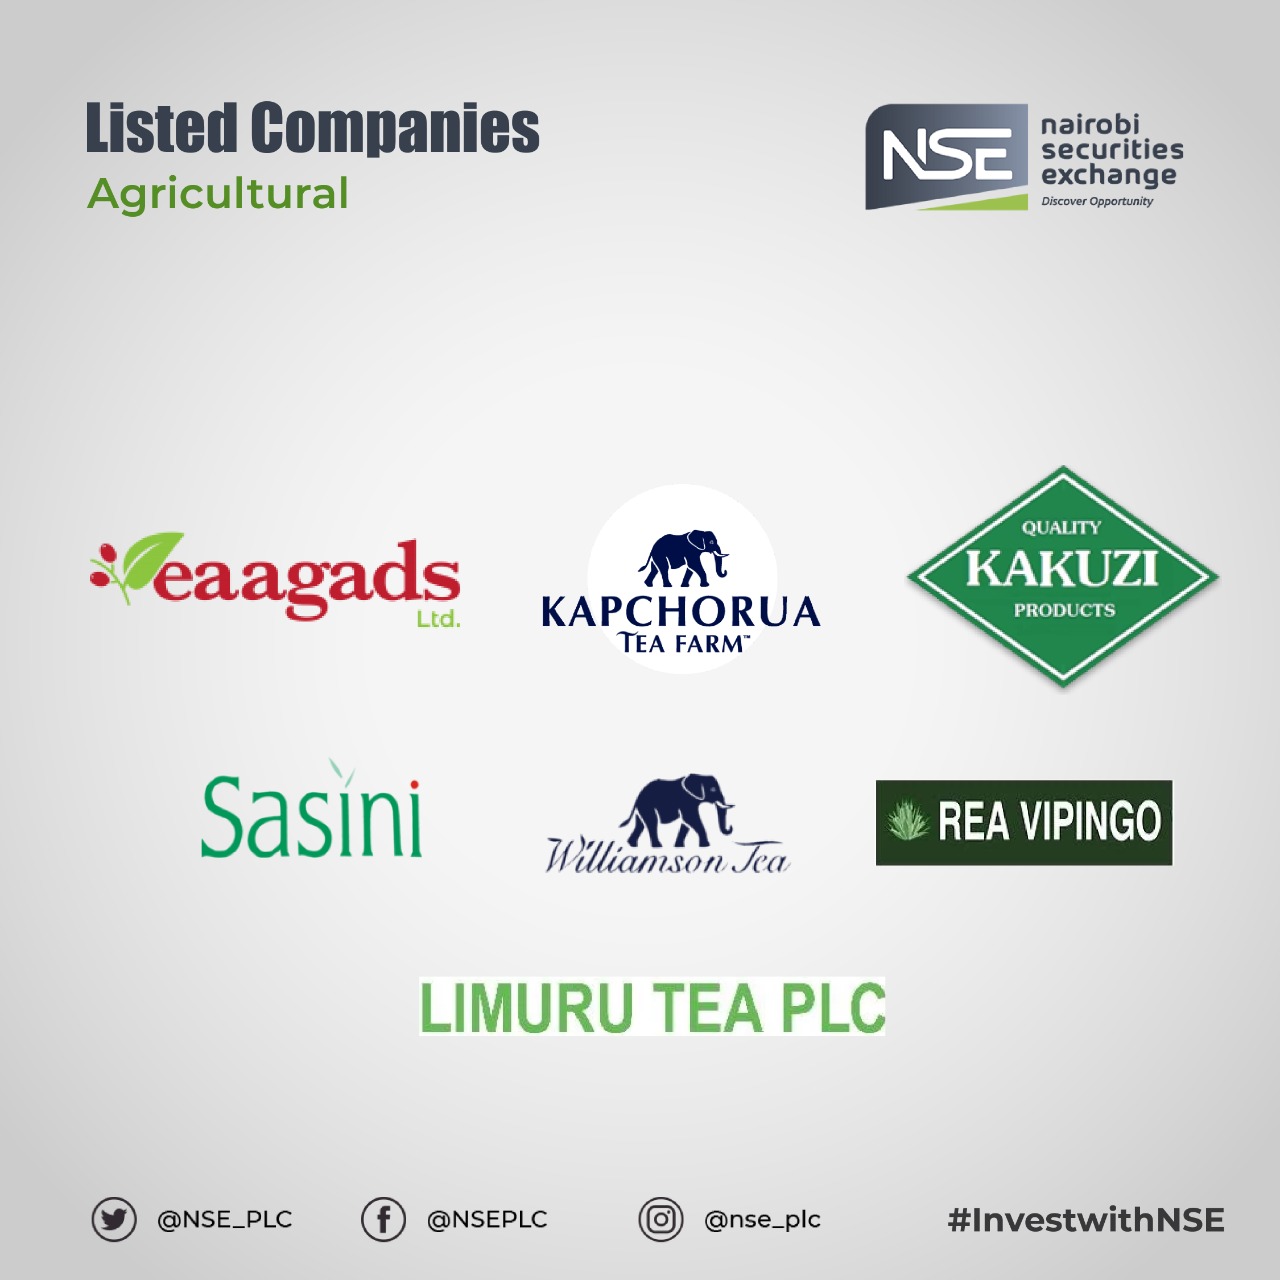  Agricultural firms listed on Nairobi Securities Exchange